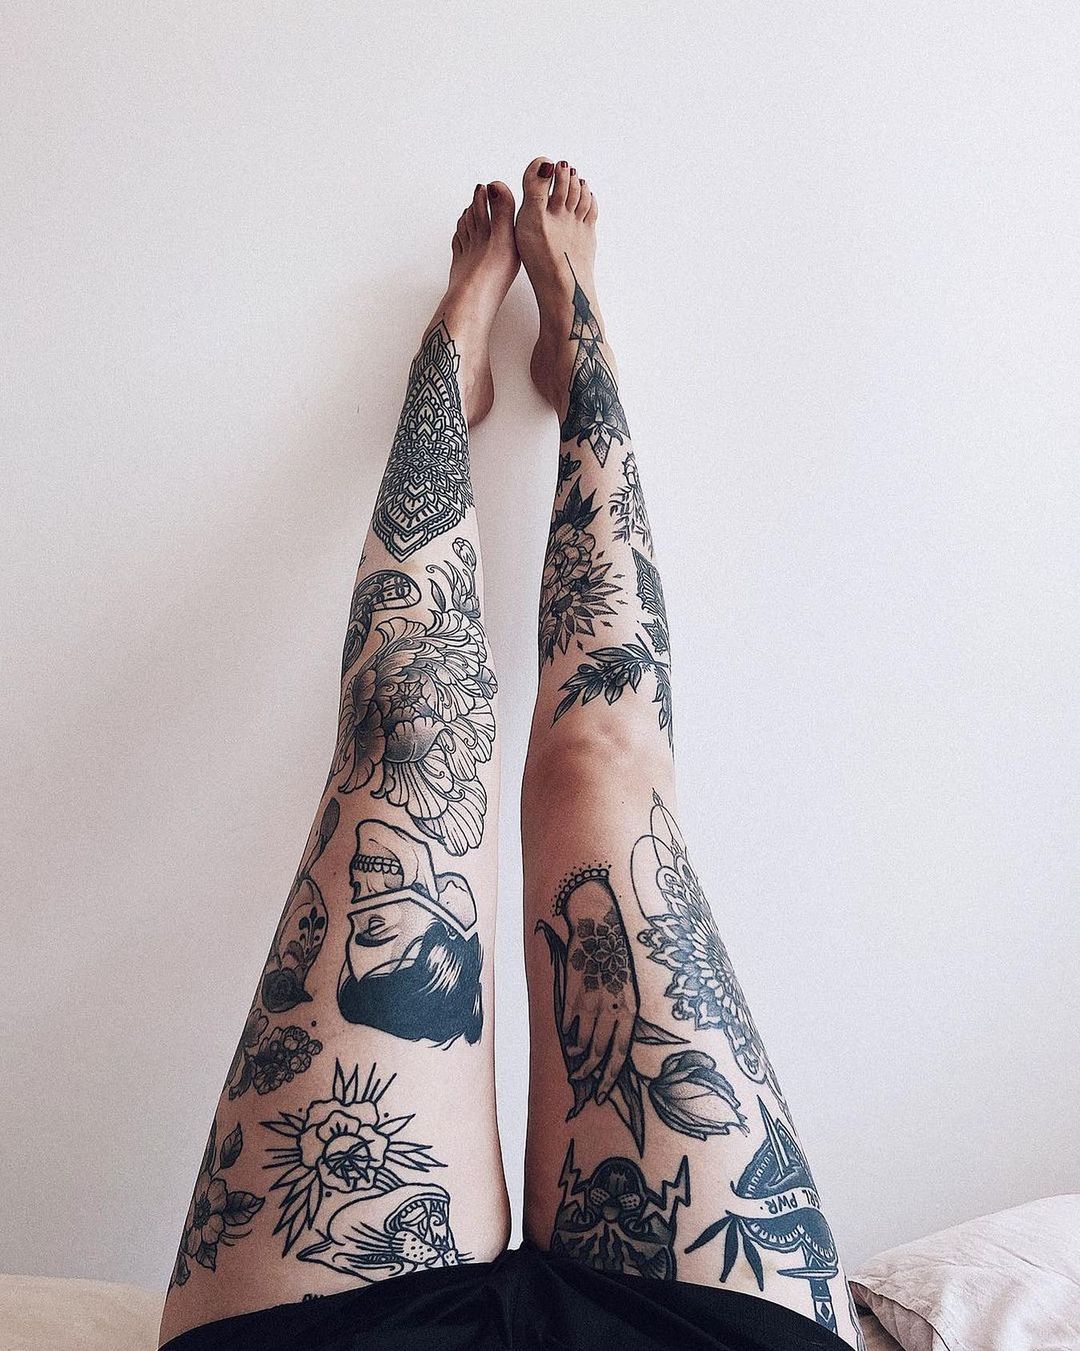 50 Great Patchwork Tattoos Ideas To Get Inspired By